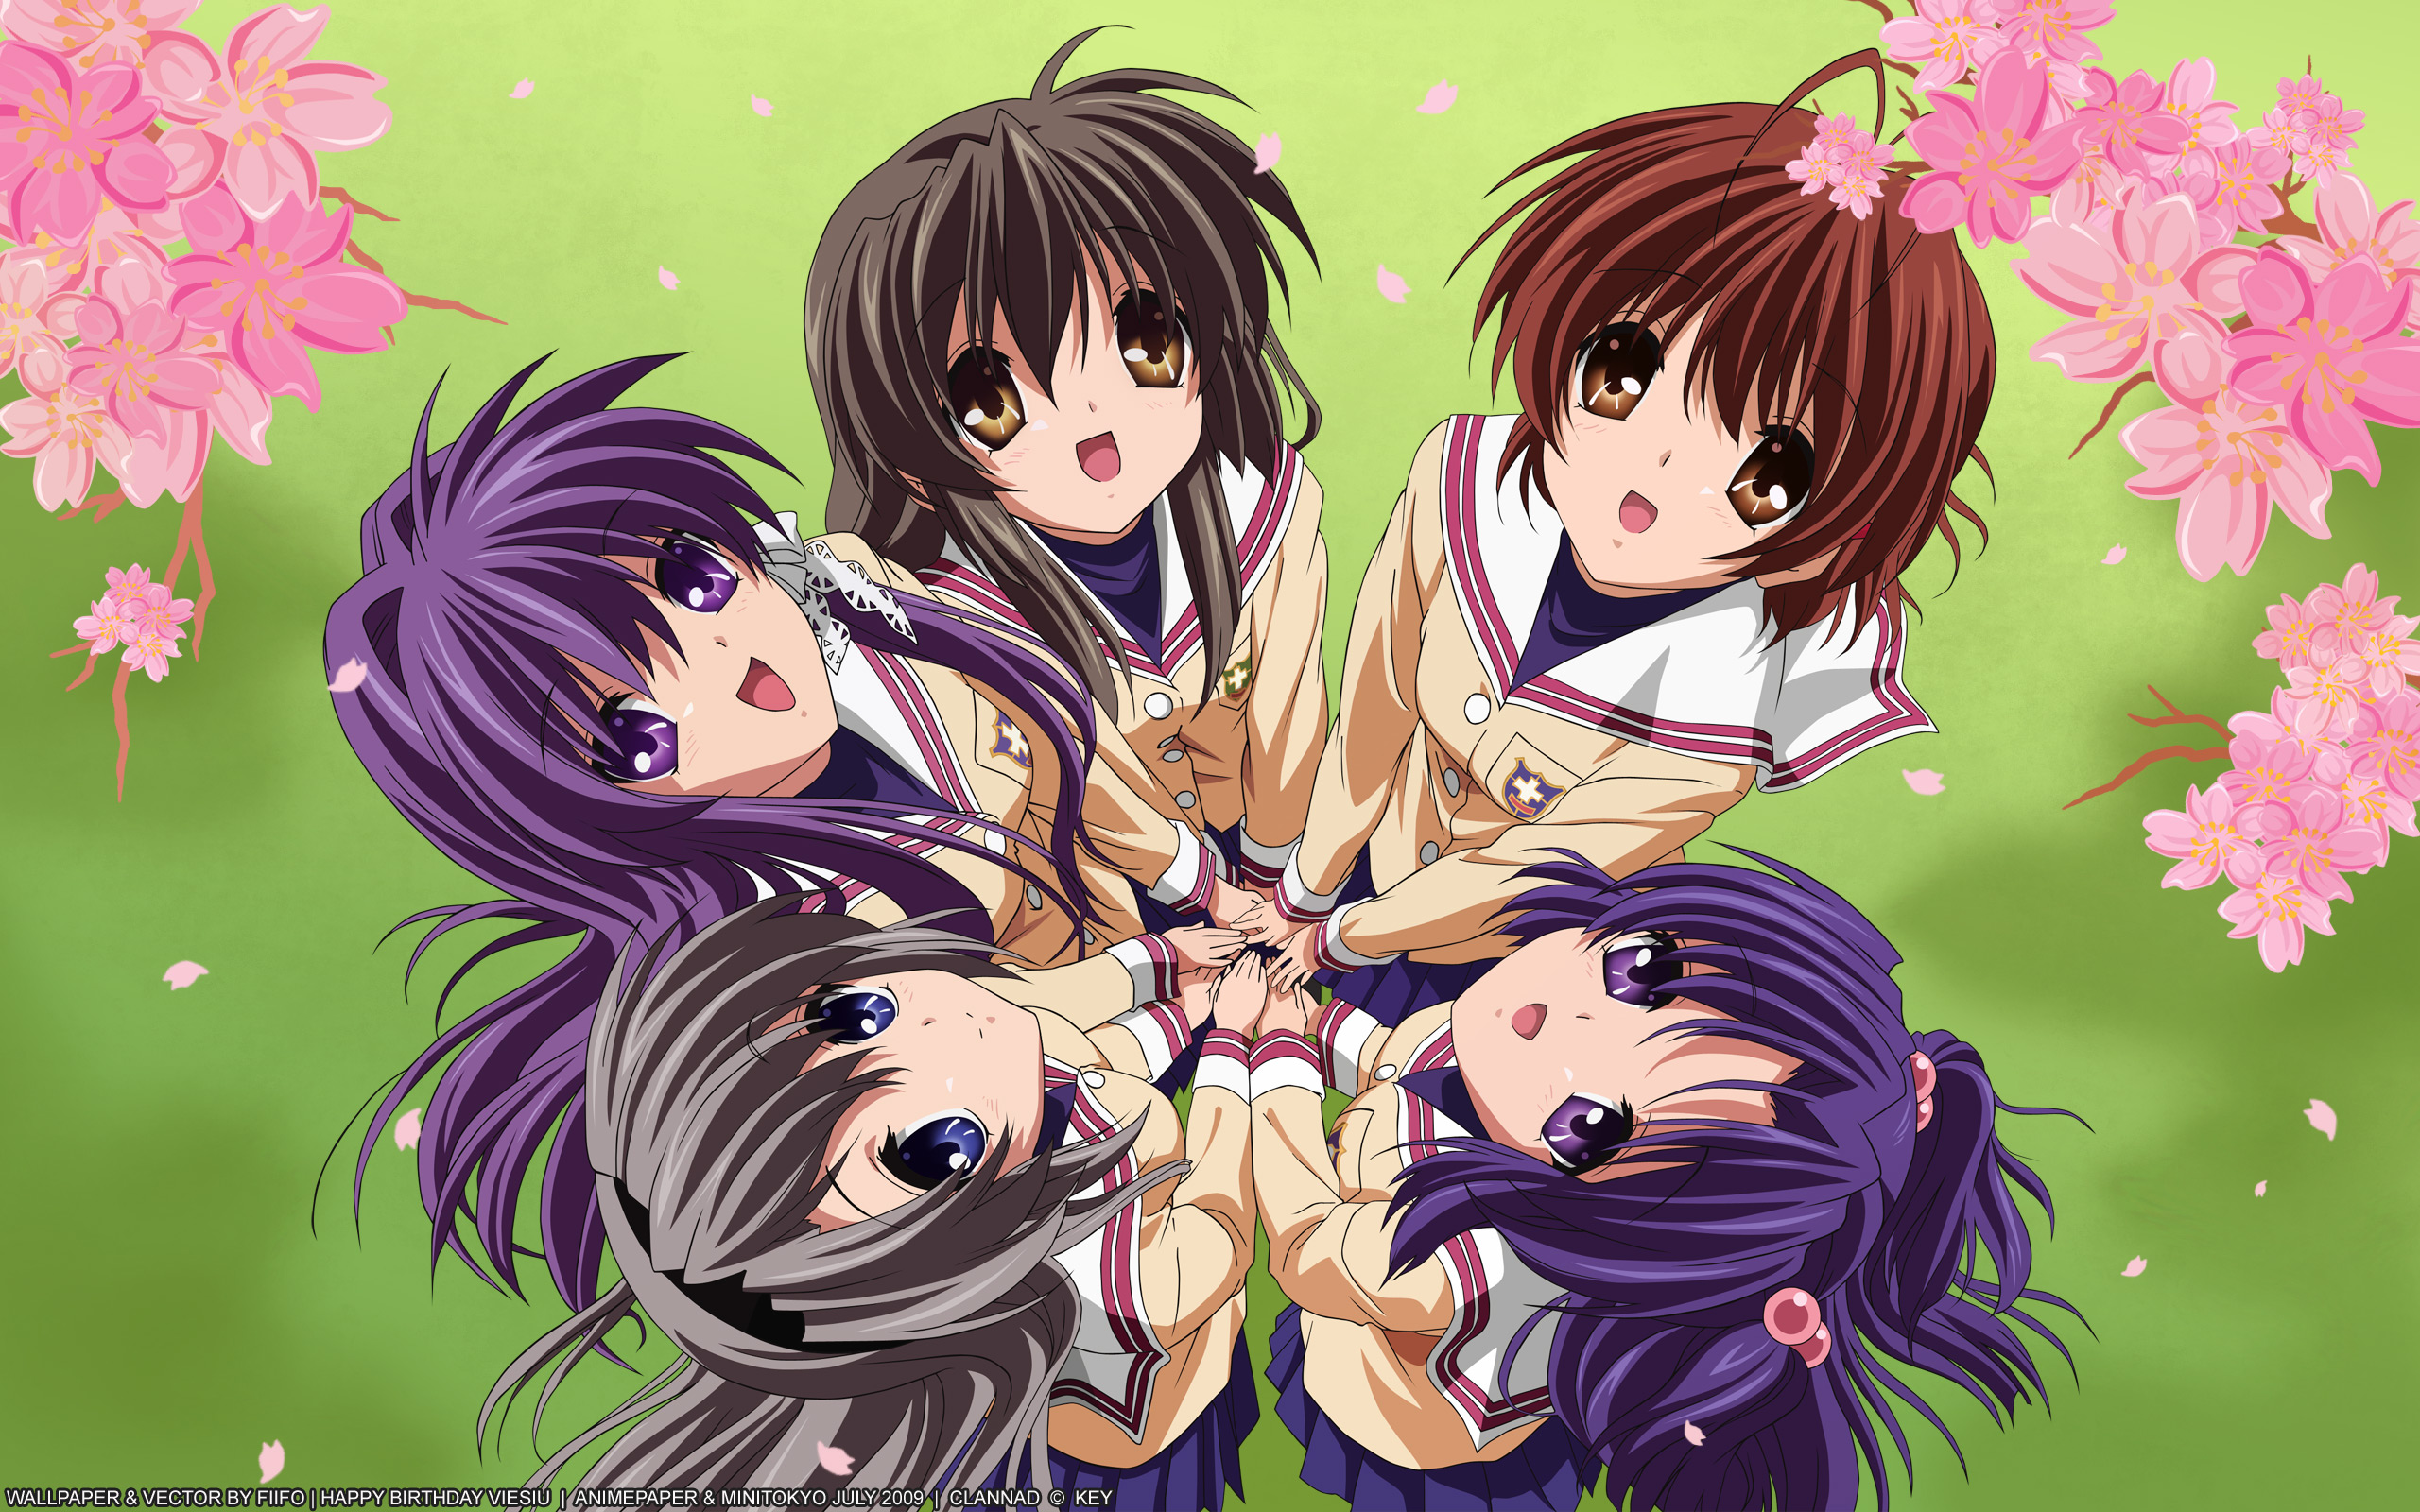 Portrait of Nagisa, Fuuko, Kyou, Kotomi, and Tomoyo from the anime Clannad.